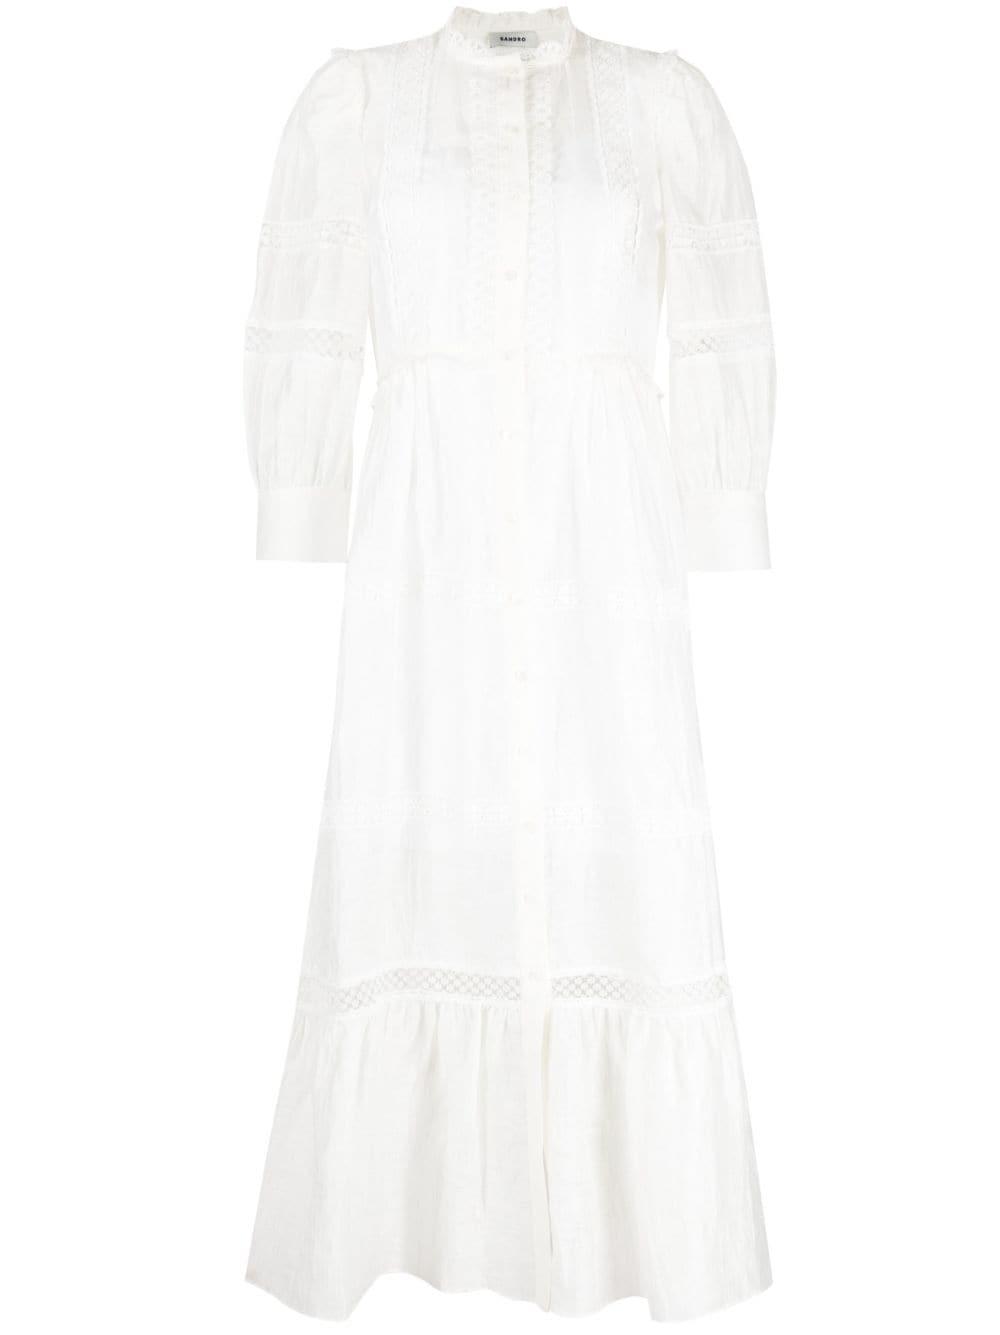 Sandro Lace-detail Midi Dress in White | Lyst